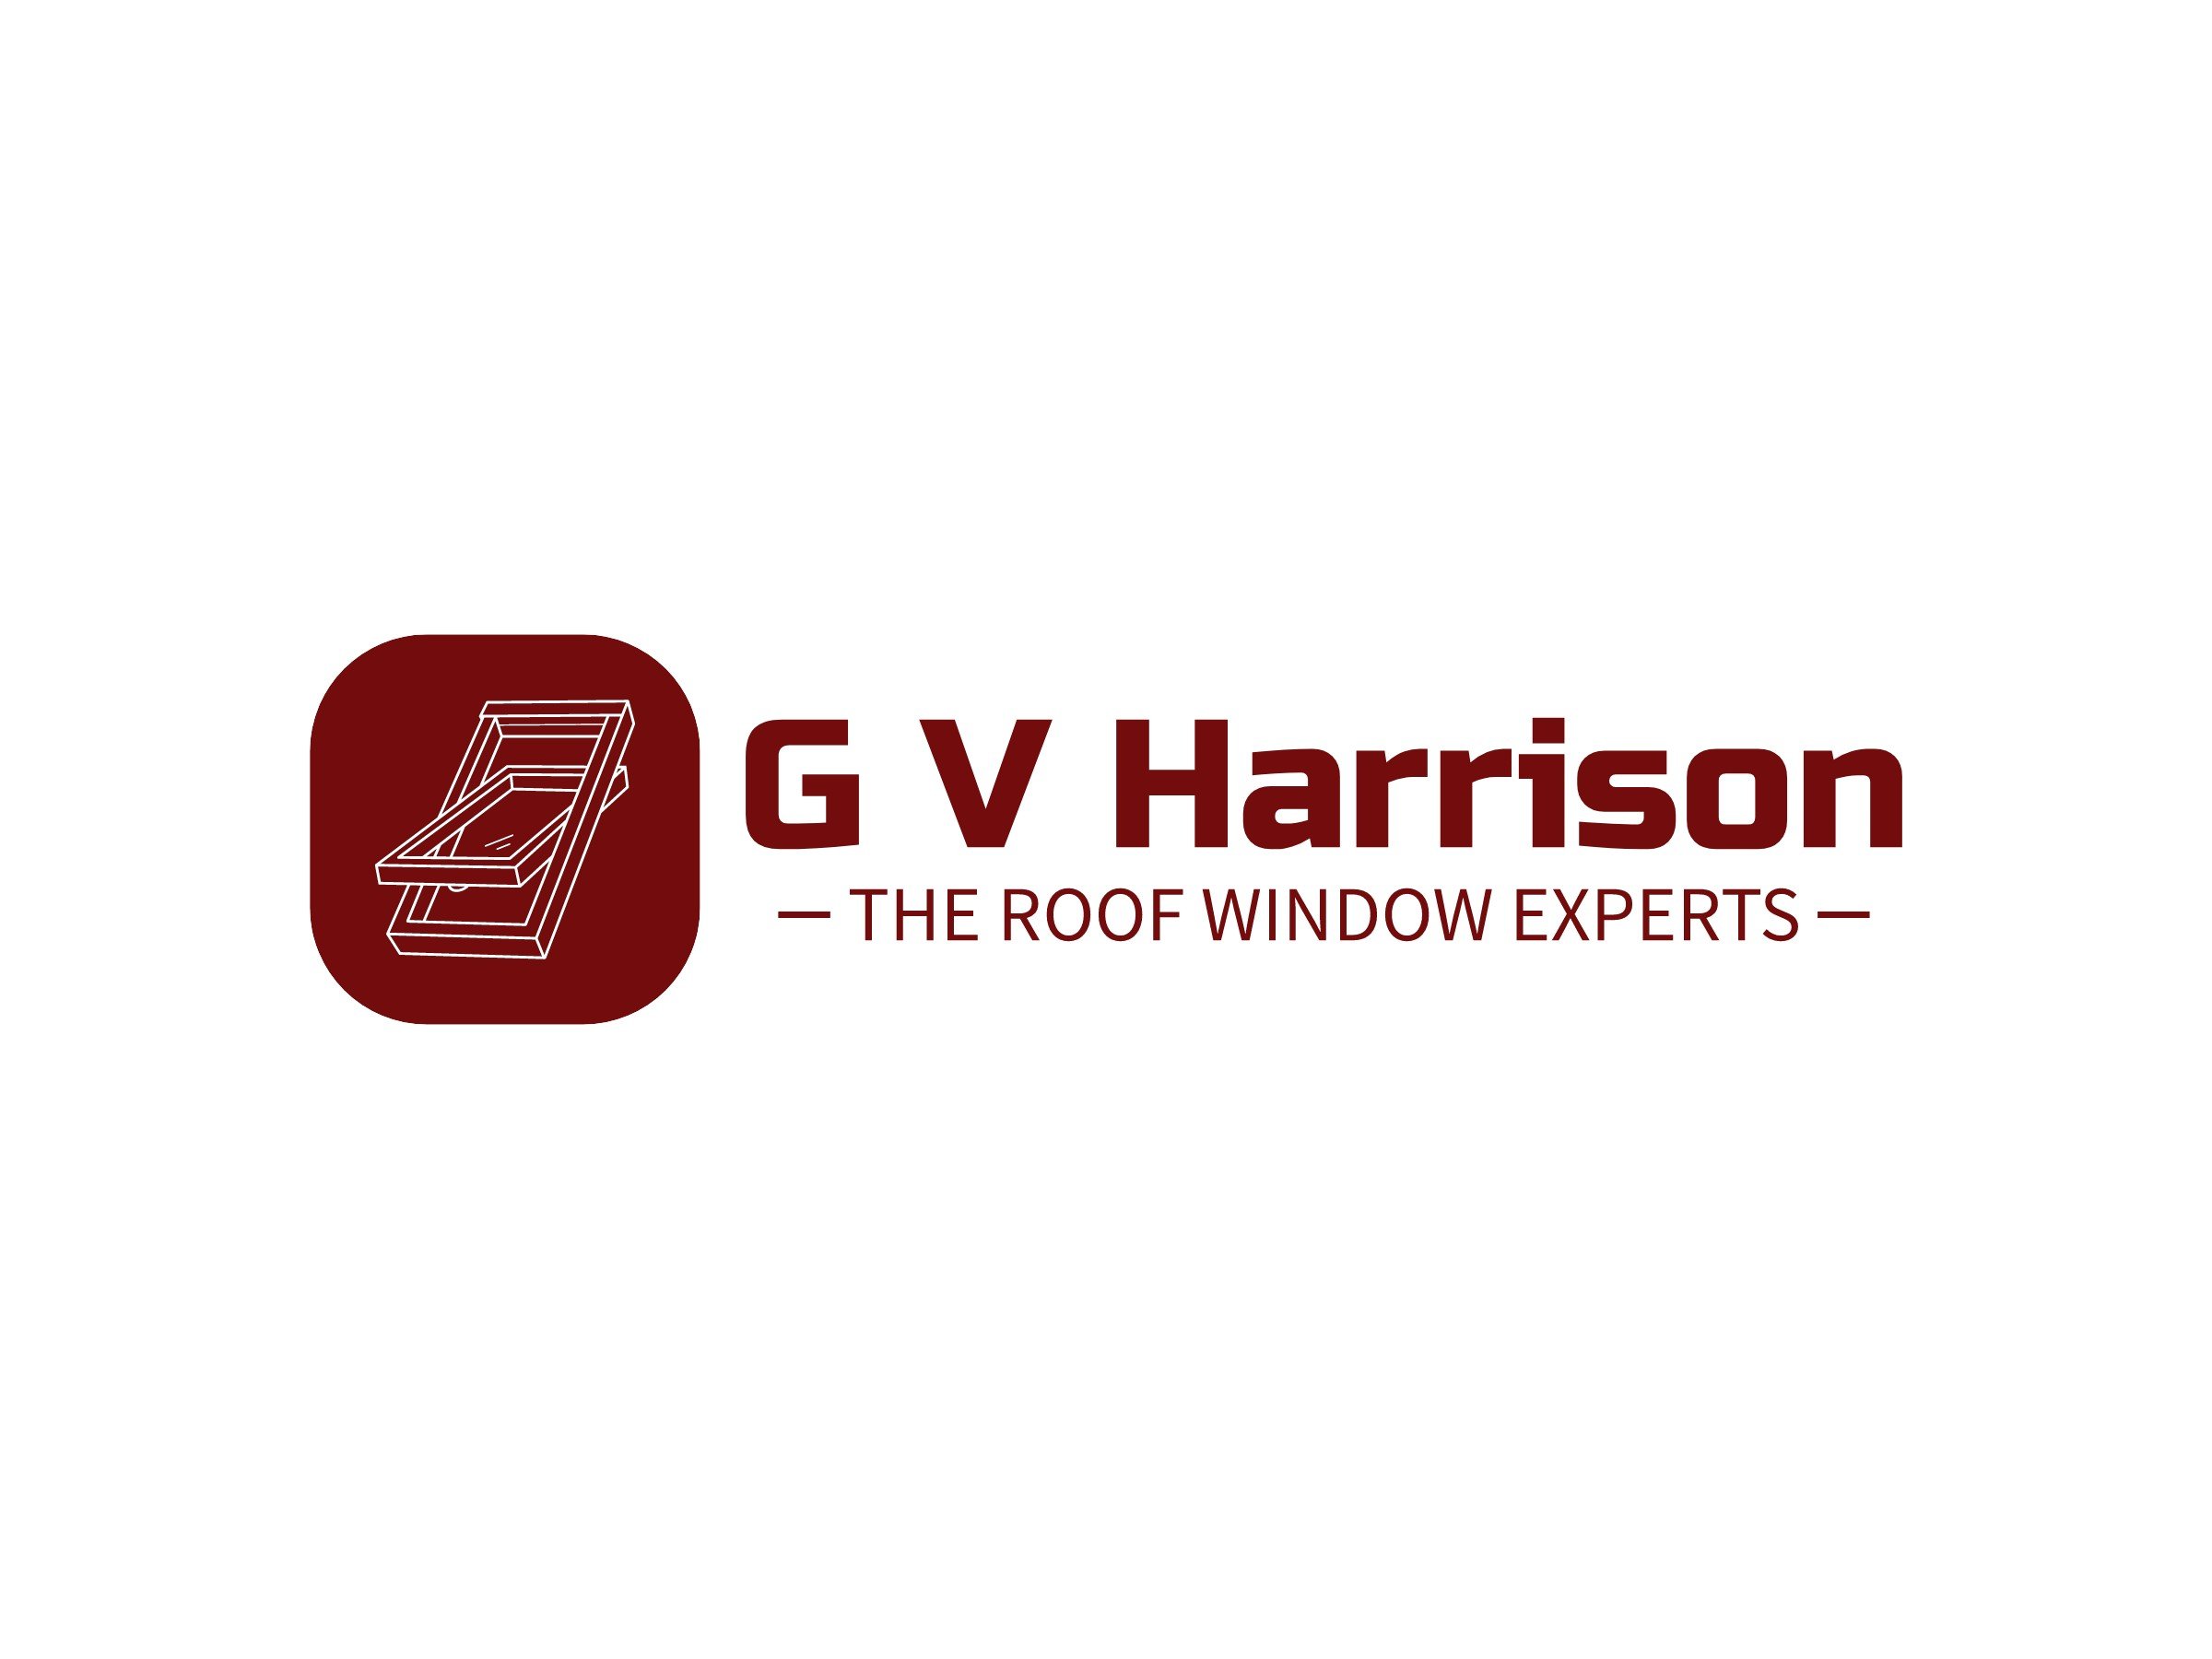 G V Harrison - The Roof Window Experts